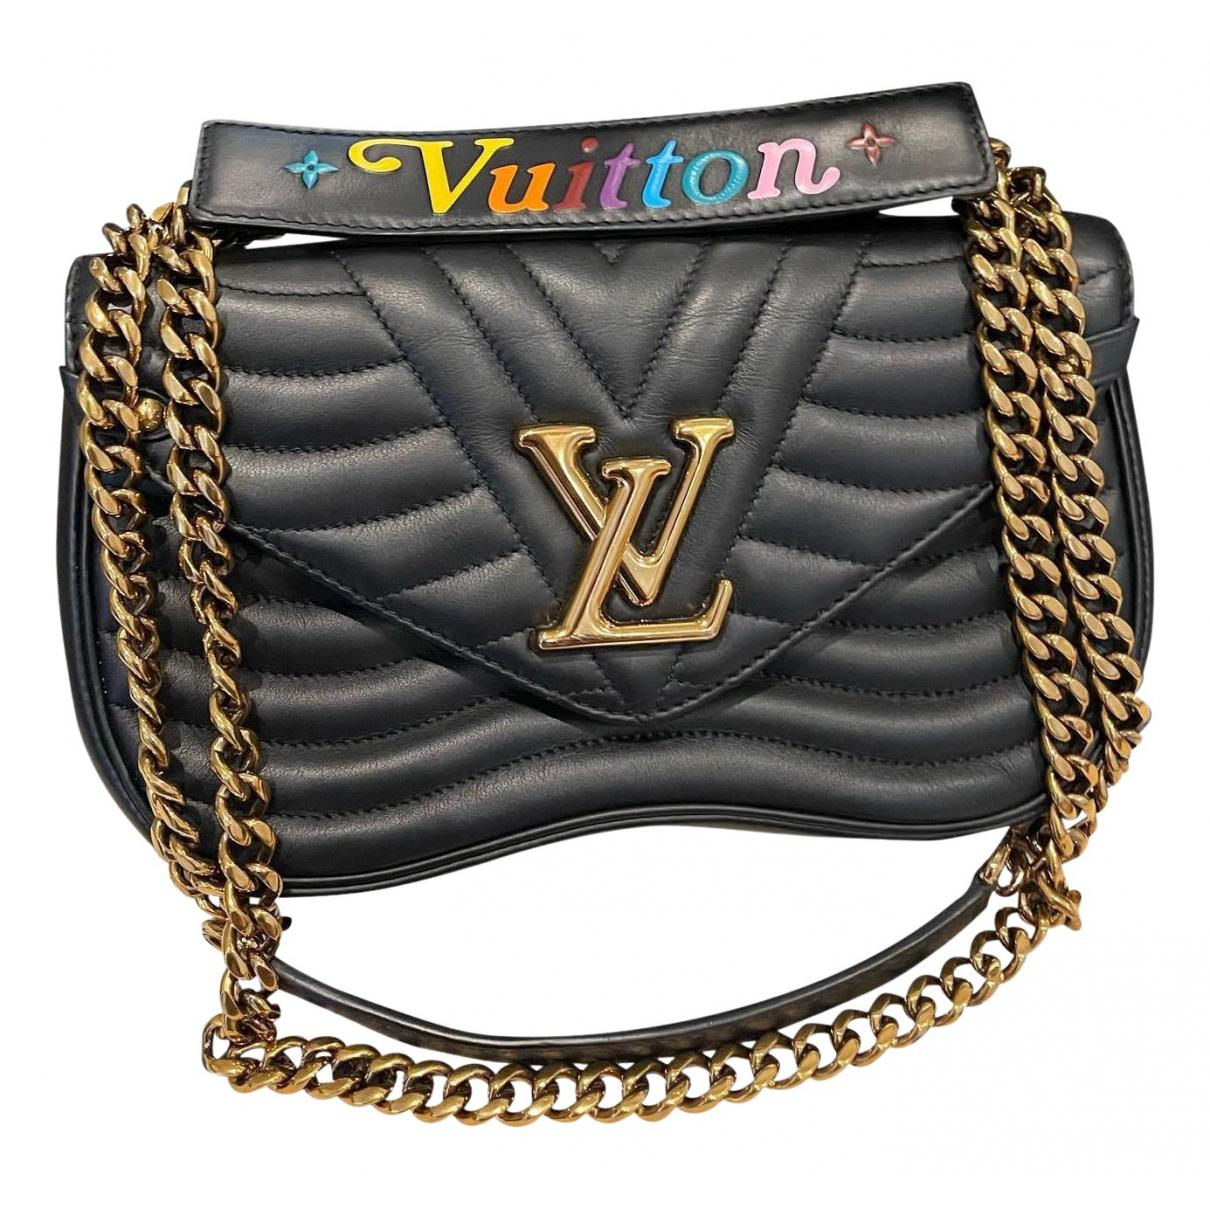 New $2850 Louis Vuitton LV Leather New Wave Chain Bag PM Black